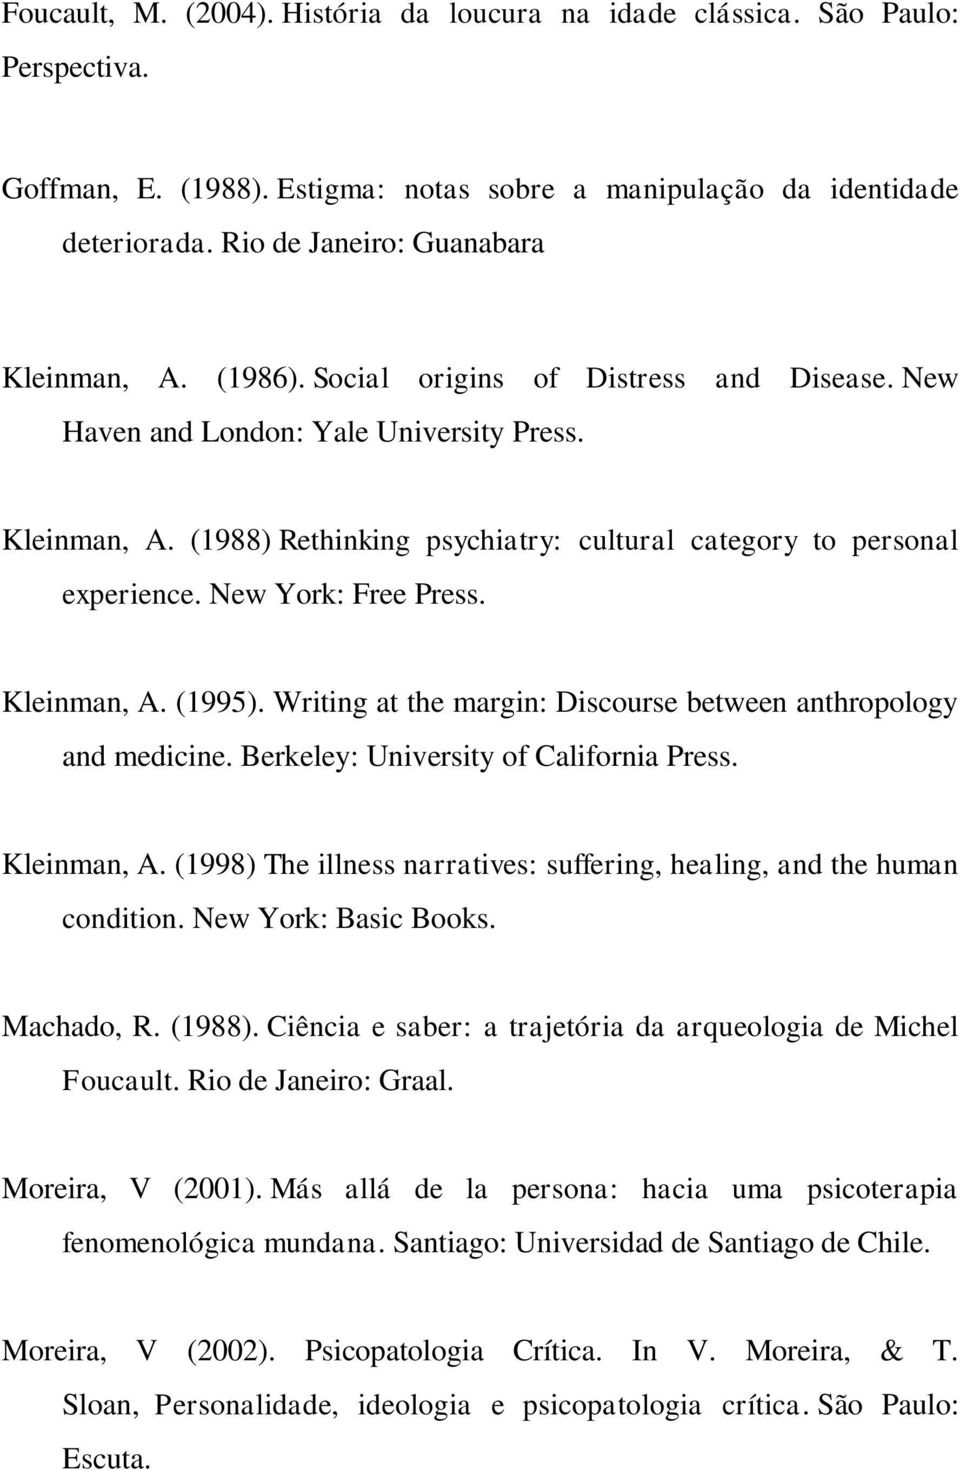 New York: Free Press. Kleinman, A. (1995). Writing at the margin: Discourse between anthropology and medicine. Berkeley: University of California Press. Kleinman, A. (1998) The illness narratives: suffering, healing, and the human condition.